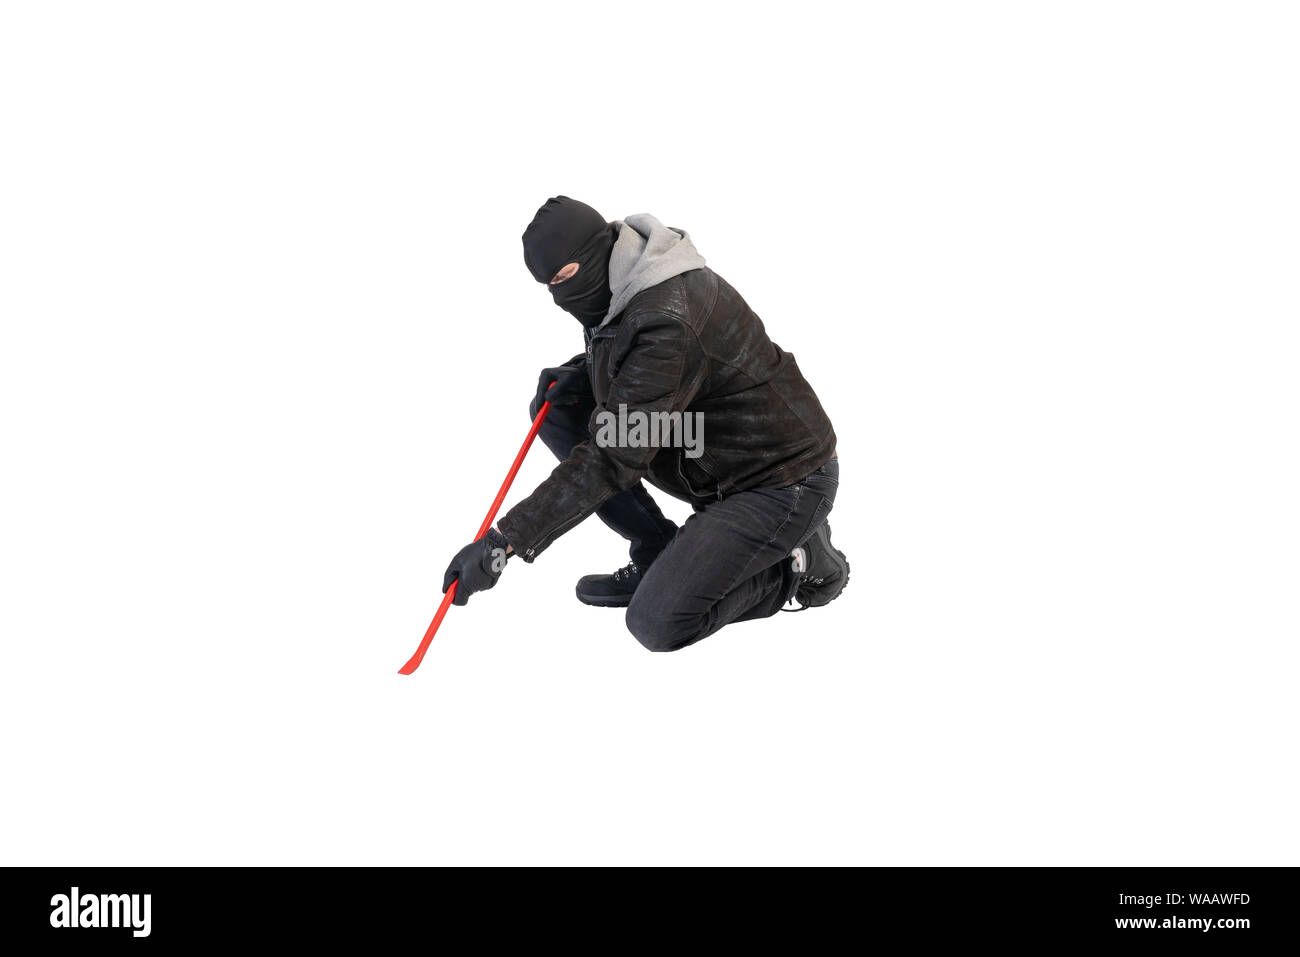 burglar knee with crowbar and mask against a white background Stock Photo